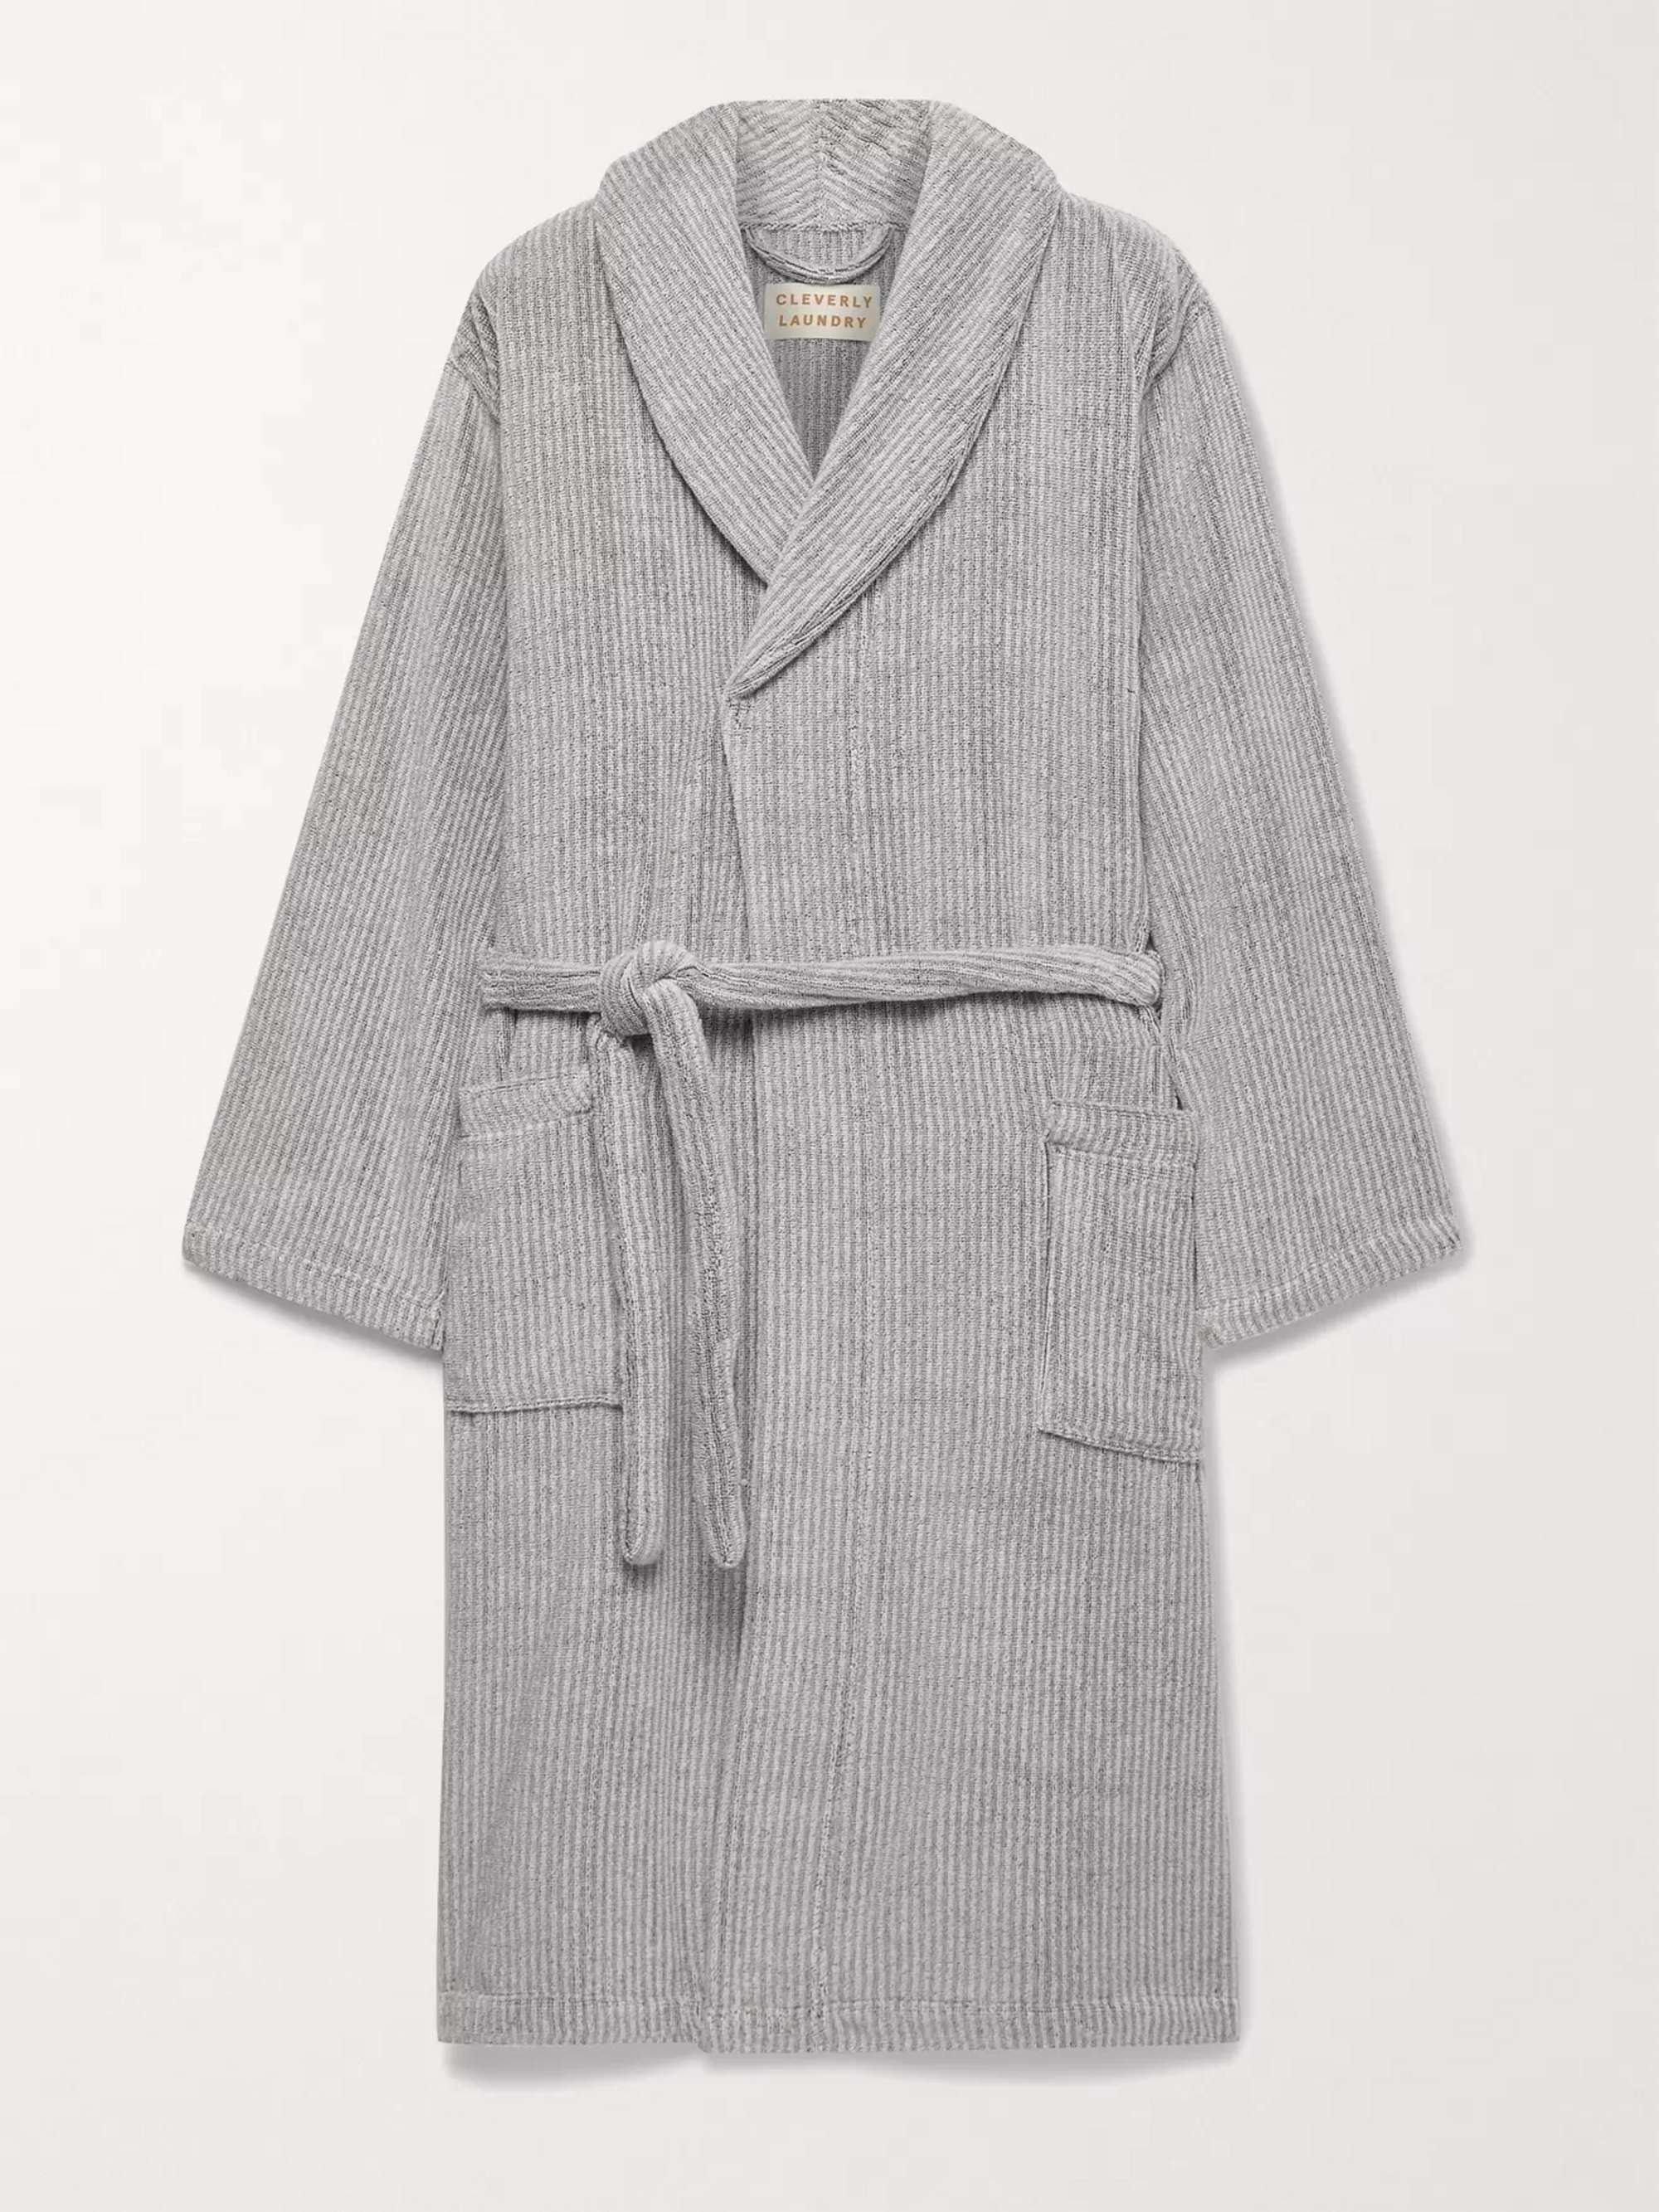 CLEVERLY LAUNDRY Pinstriped Cotton-Terry Robe